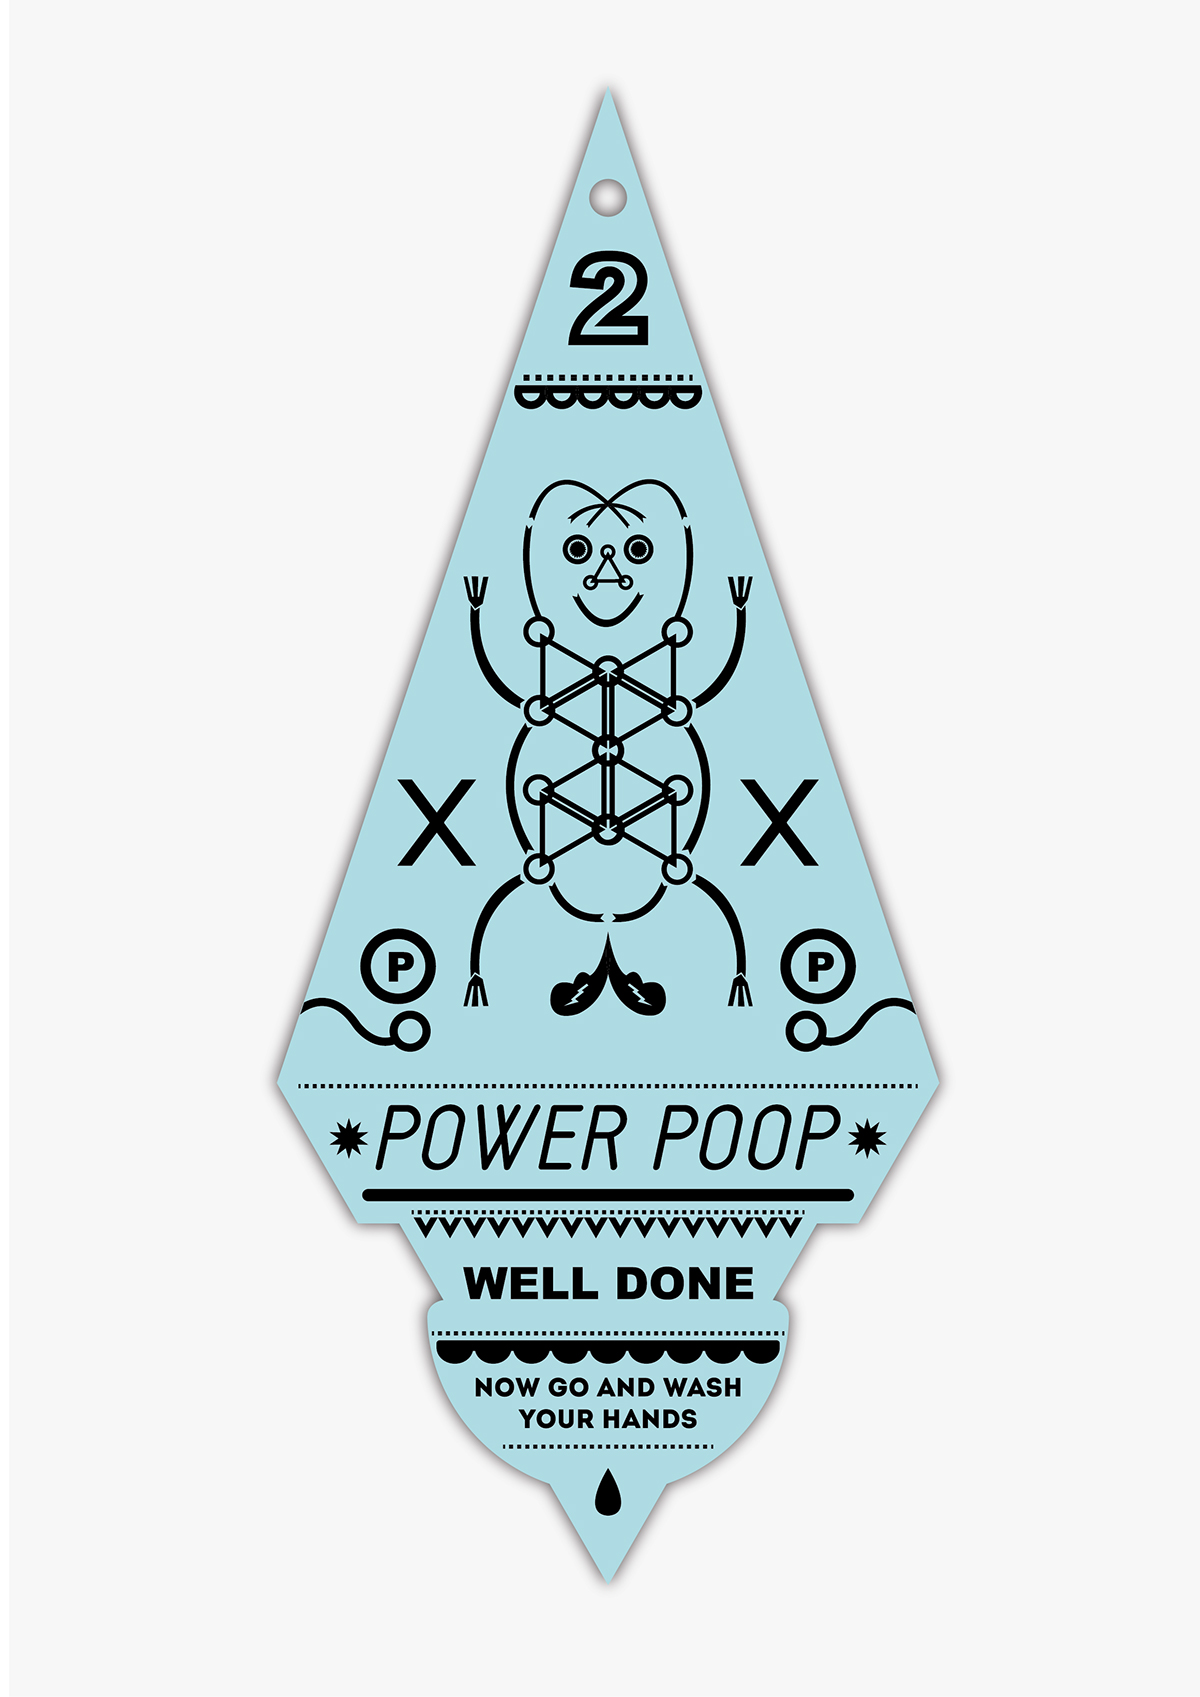 Power poop power pee boy humour wash your hands justin southey cape town